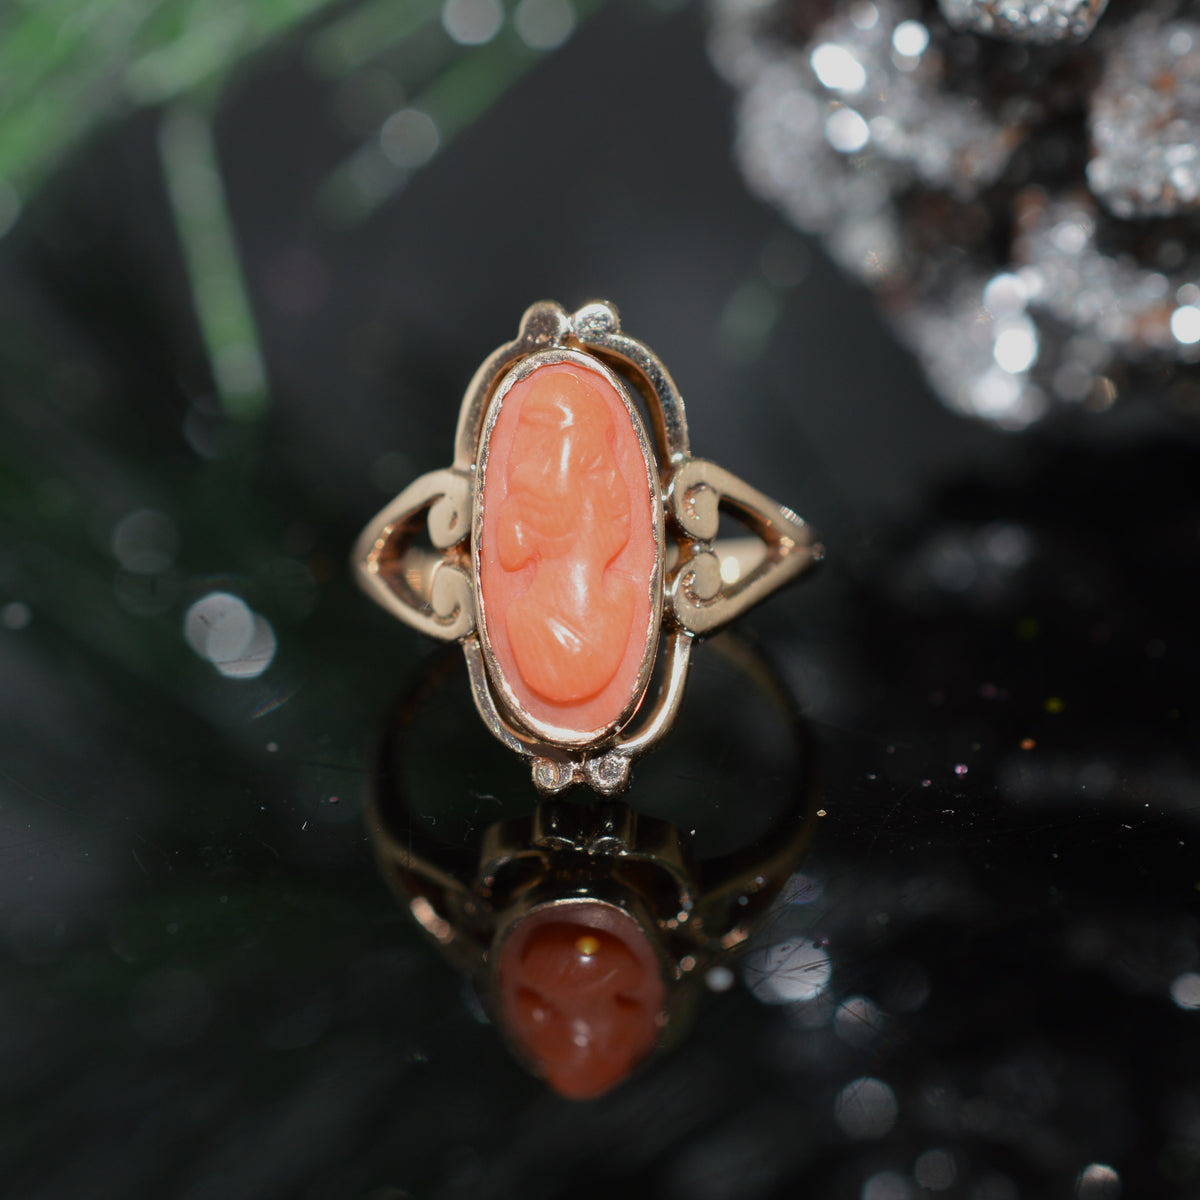 10K Yellow Gold Antique Elongated Coral Cameo Ring